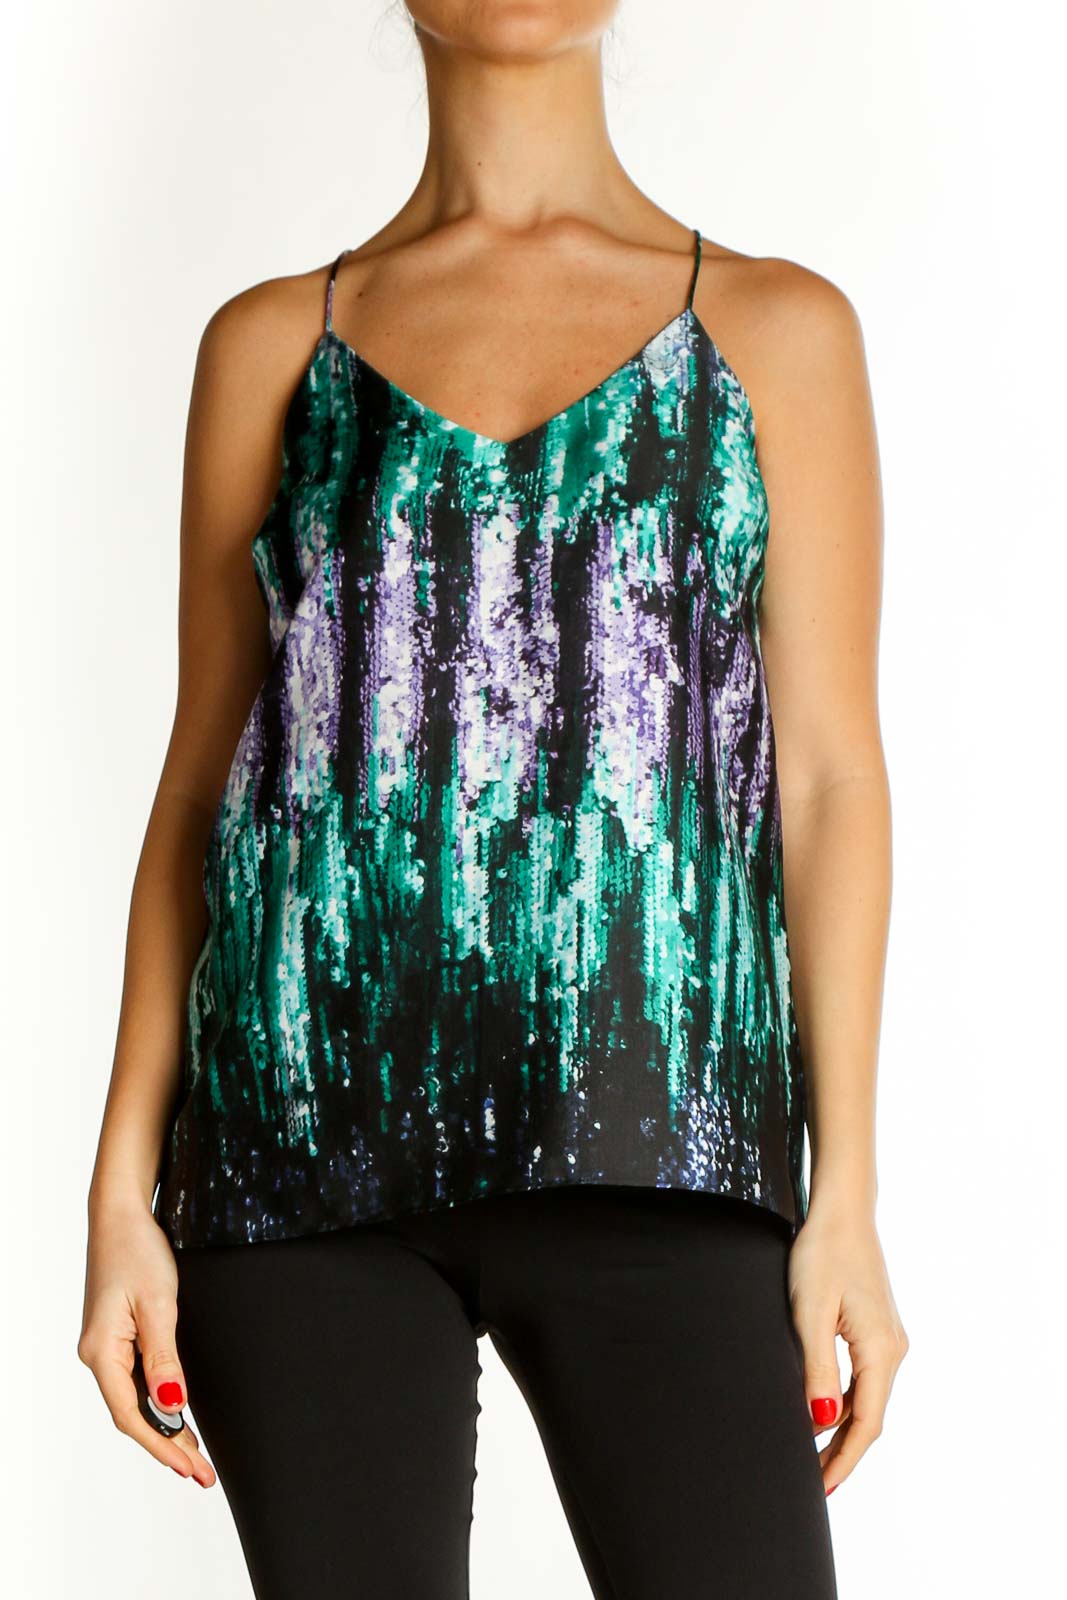 Black Graphic Print Sequin Party Top Front